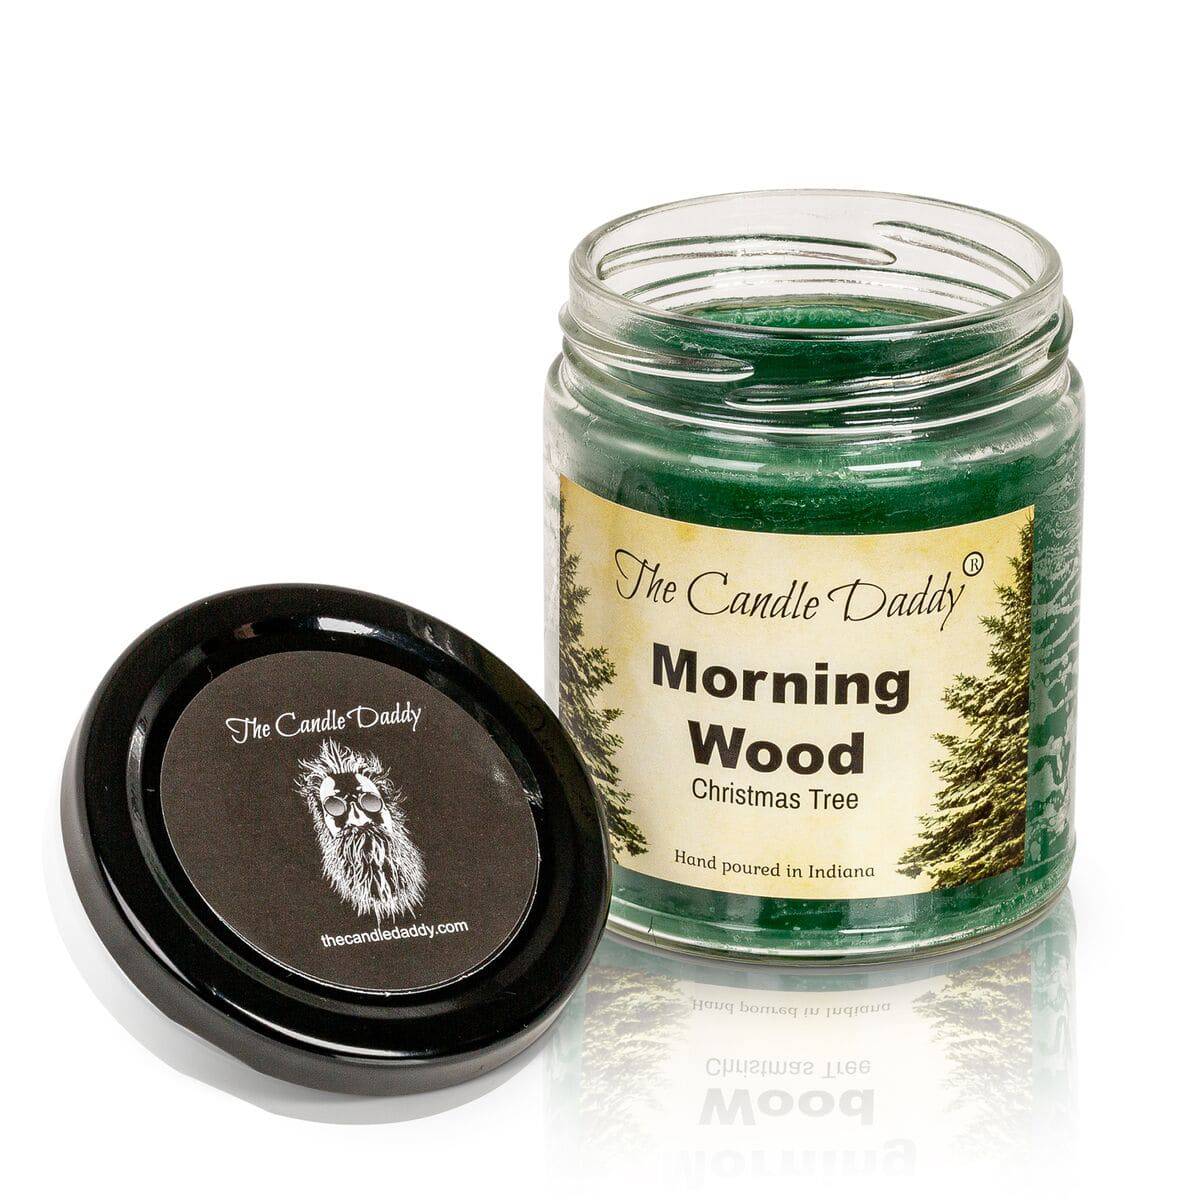 Morning Wood Christmas Holiday Candle - Funny Blue Spruce Pine Tree Scented  Candle - Funny Holiday Candle for Christmas, New Years - Long Burn Time,  Holiday Fragrance, Hand Poured in USA 